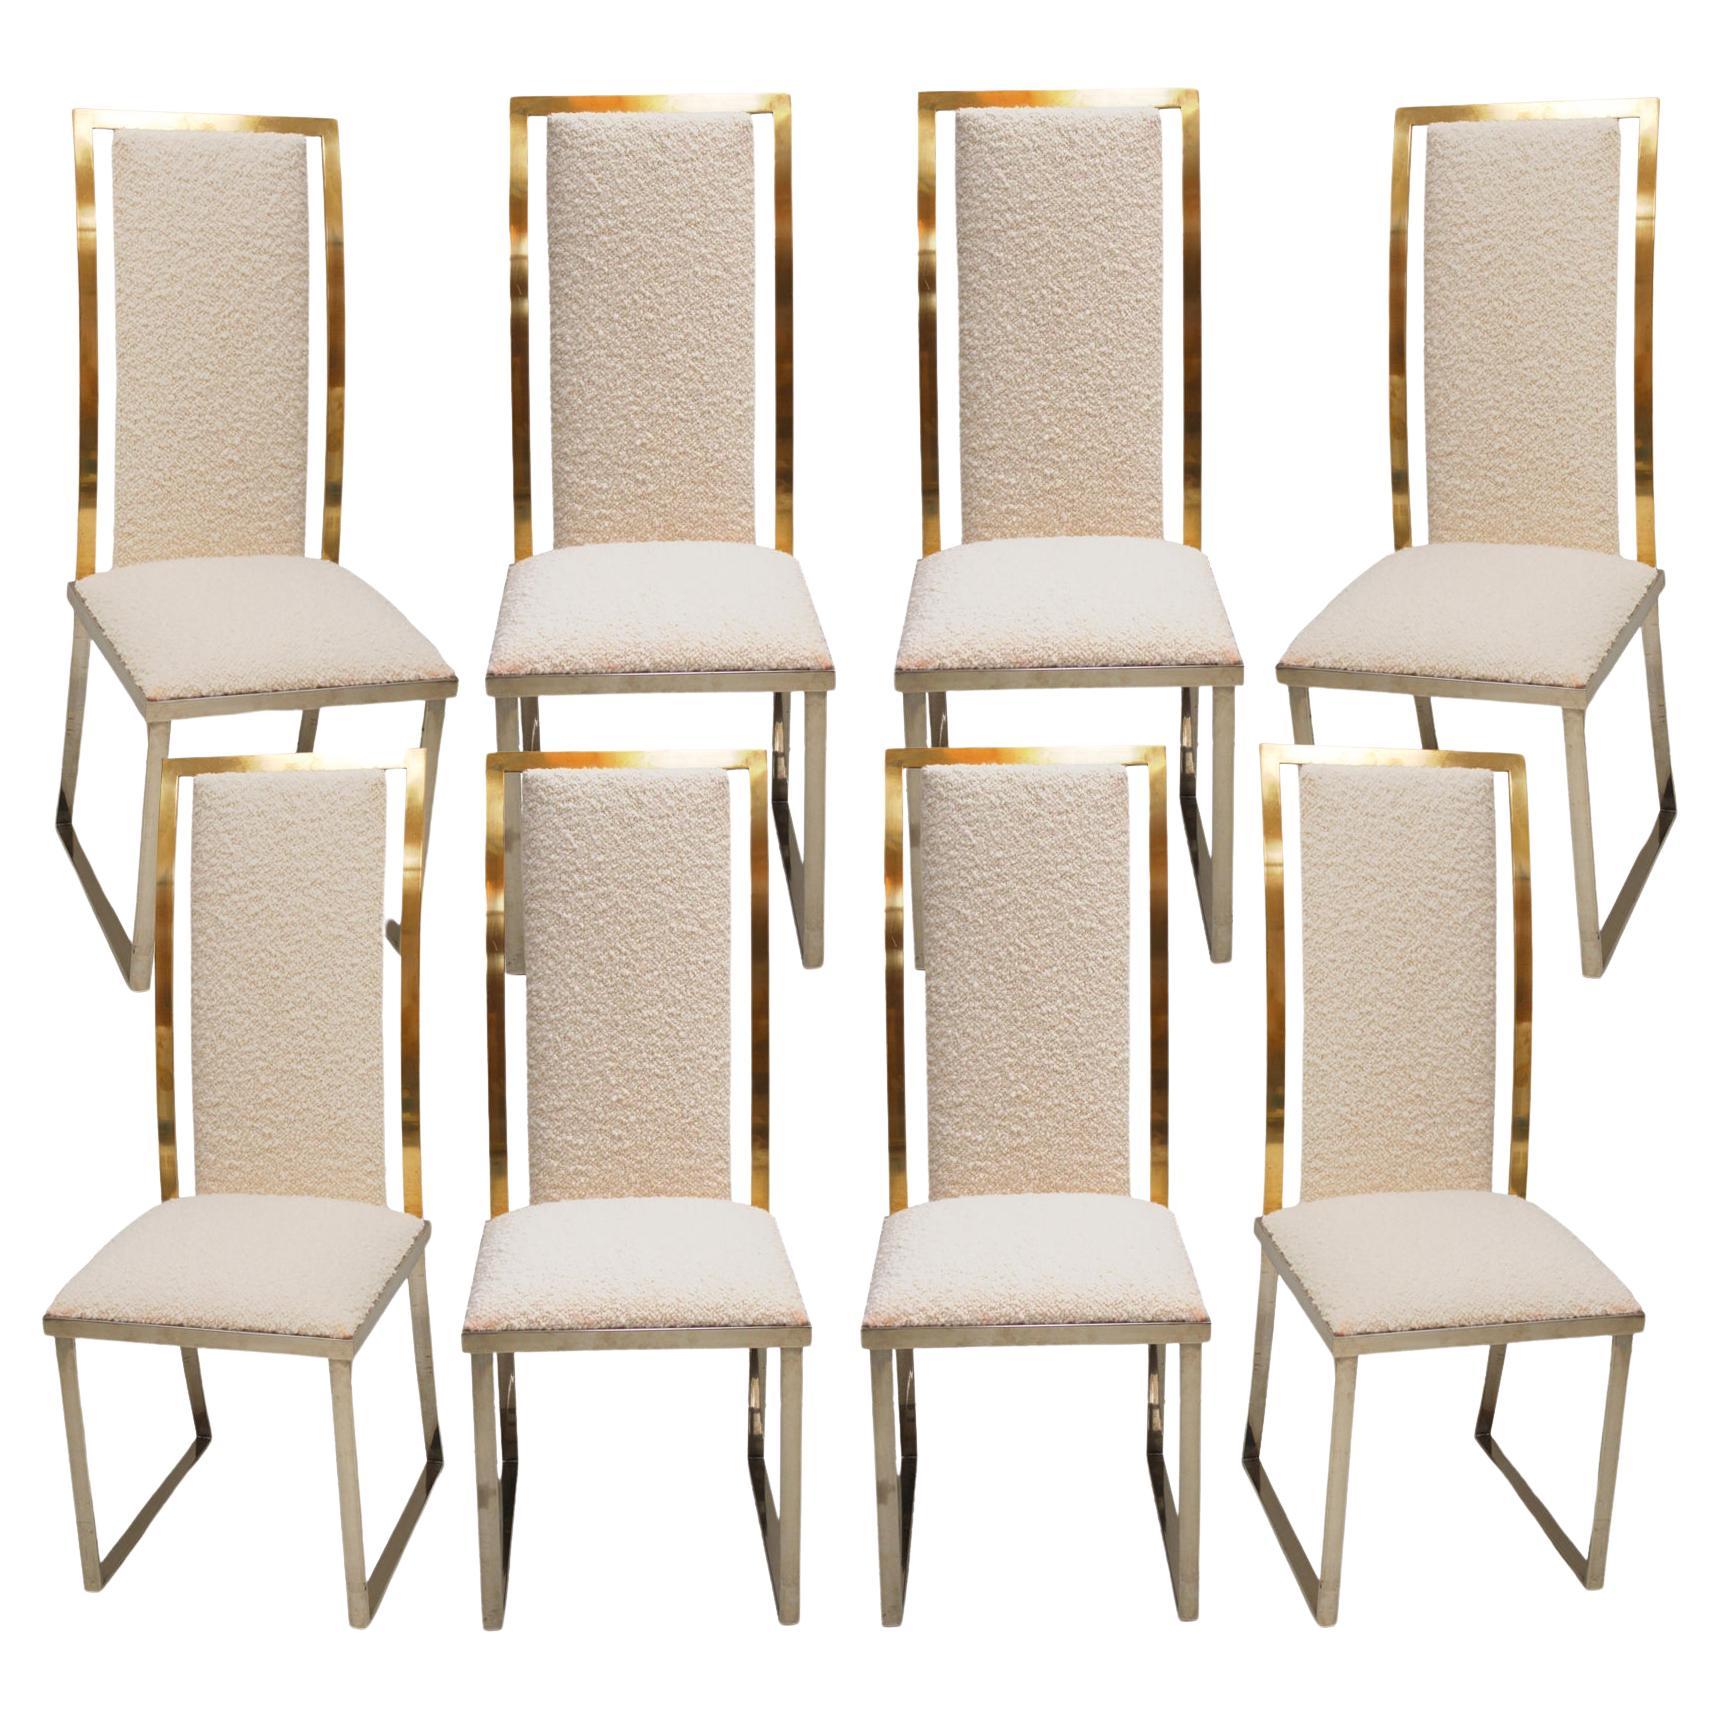 Set of Eight Chairs in bouclé wool by Michel Mangematin France 1970.